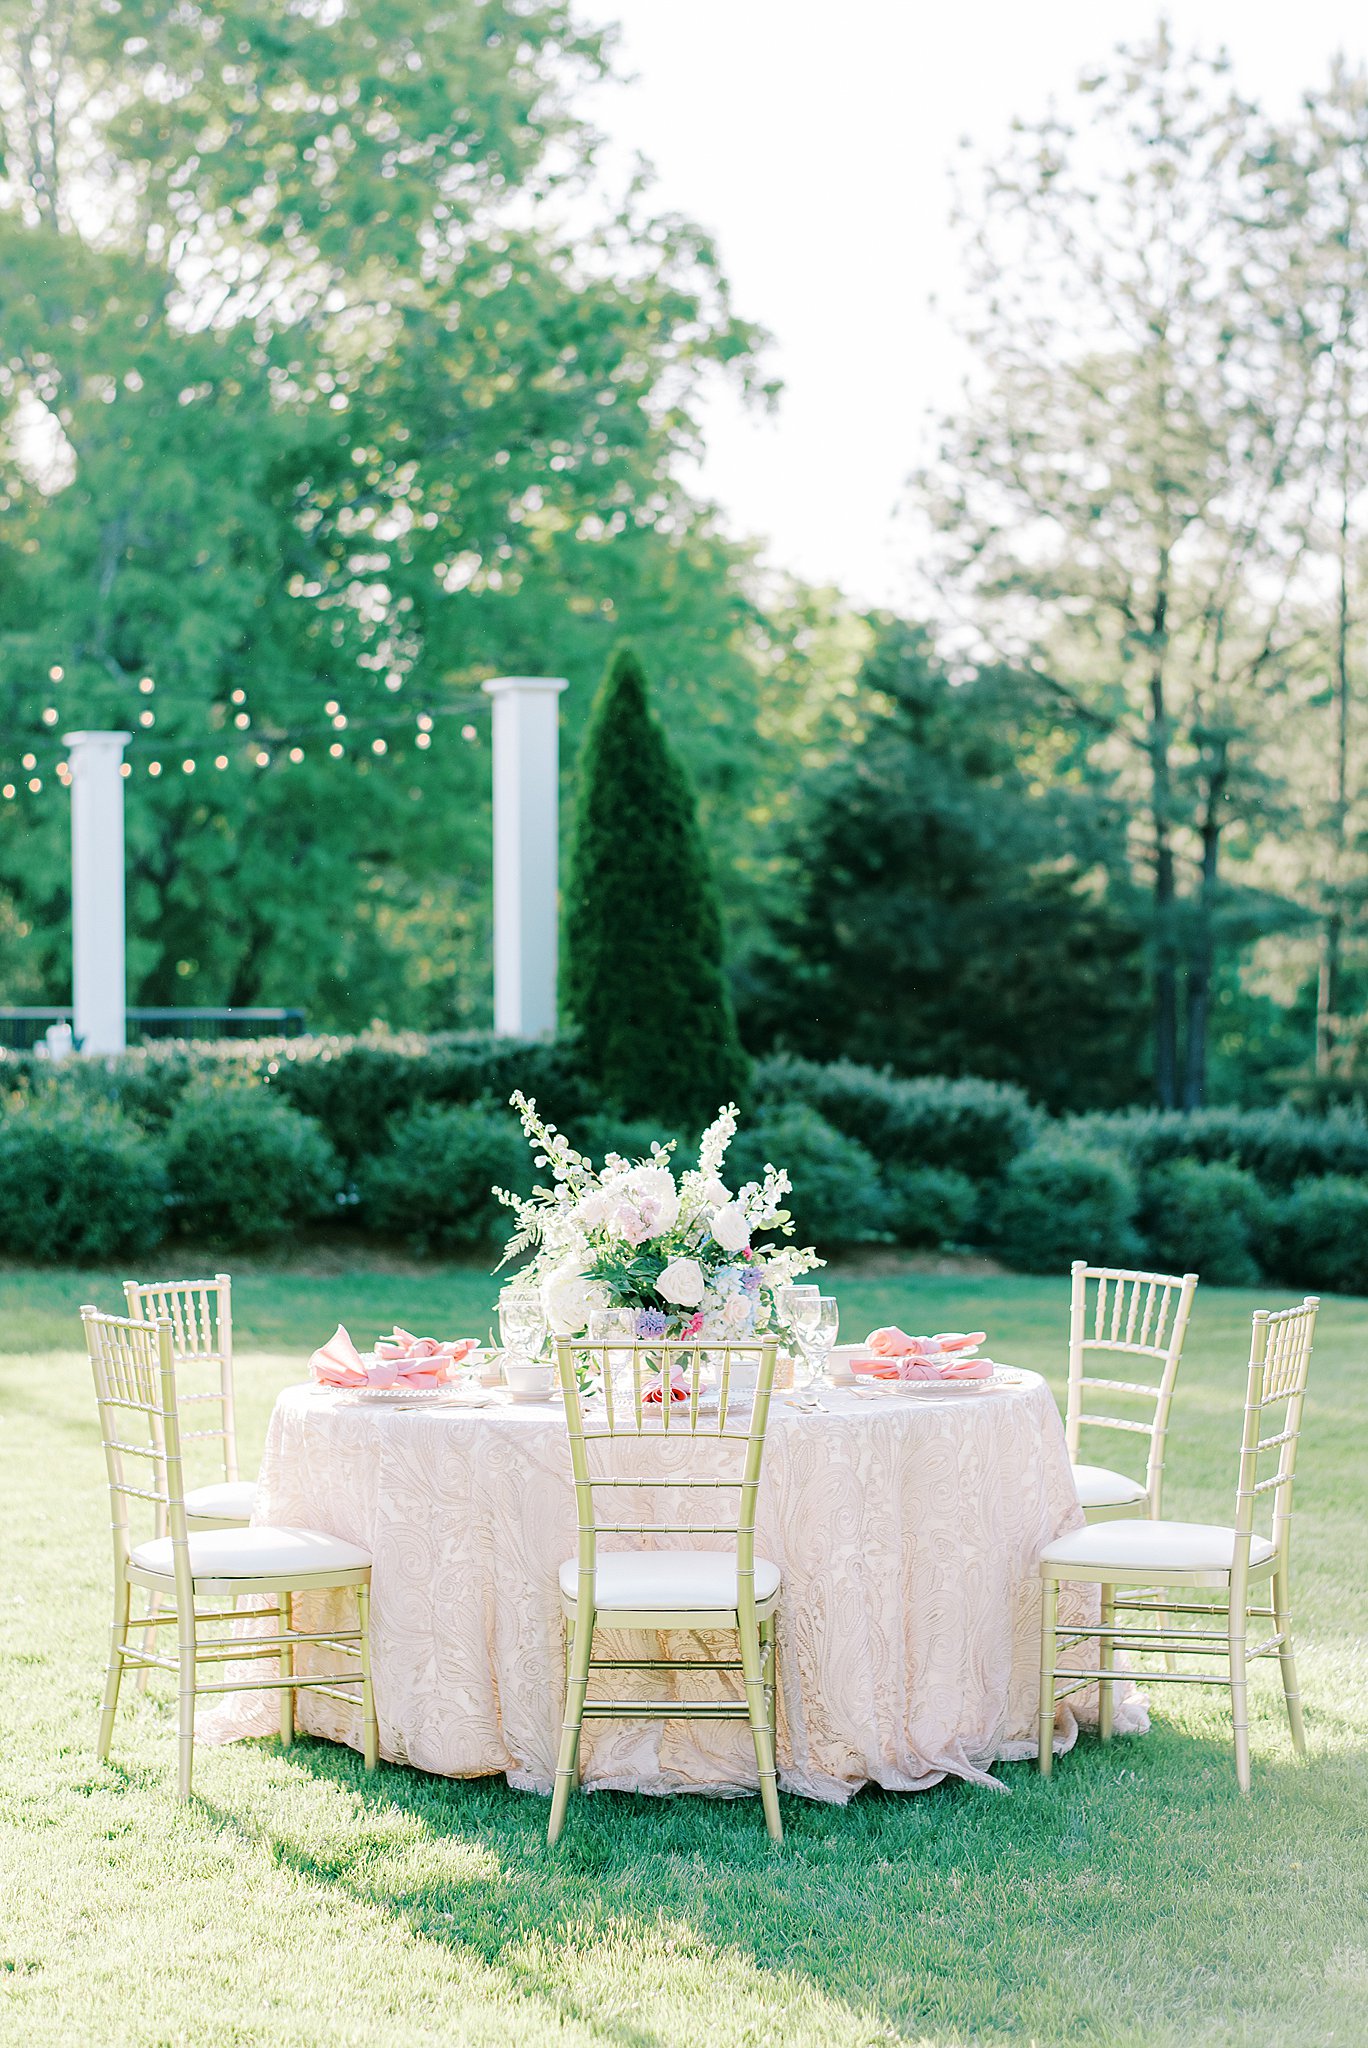 Details of an outdoor wedding reception table set up with pink linen Camellia Gardens